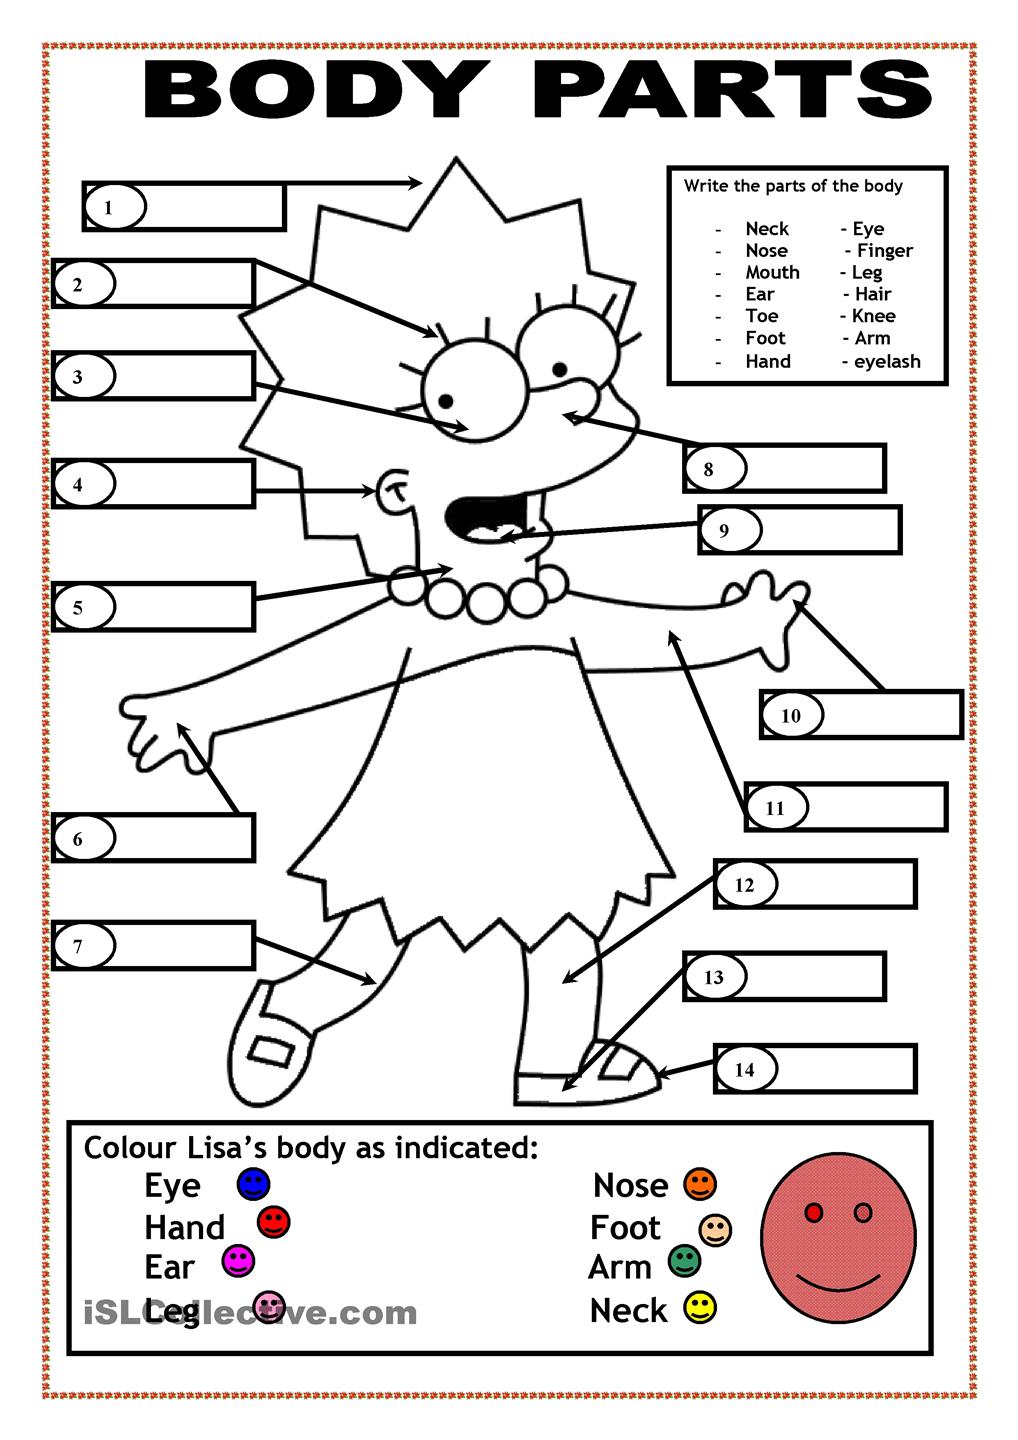 Body Parts Coloring Page For Kids